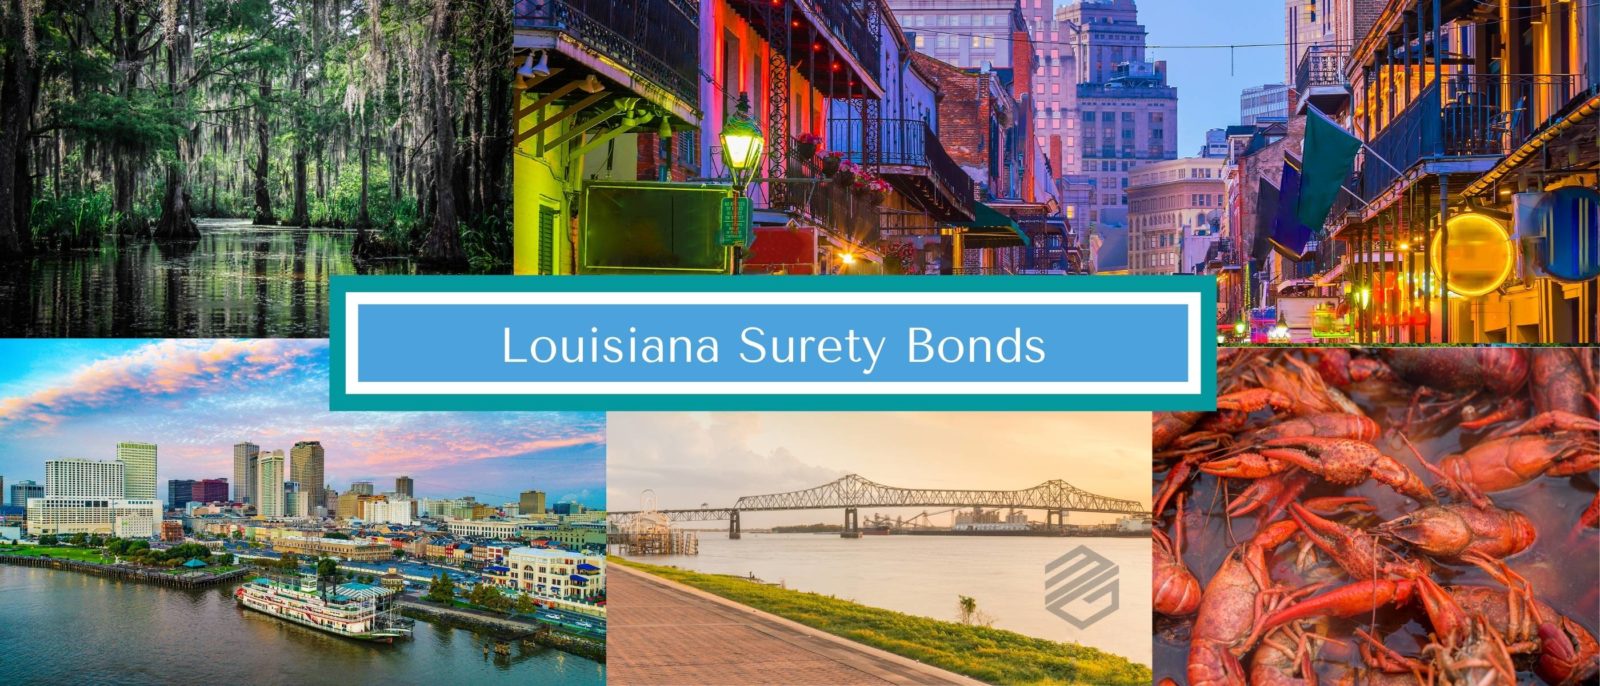 Louisiana Surety Bonds - 5 pictures representing Louisiana including New Orleans' French Quarter, Baton Rouge, a swamp and a crawfish boil. Text box reads, "Louisiana Surety Bonds".